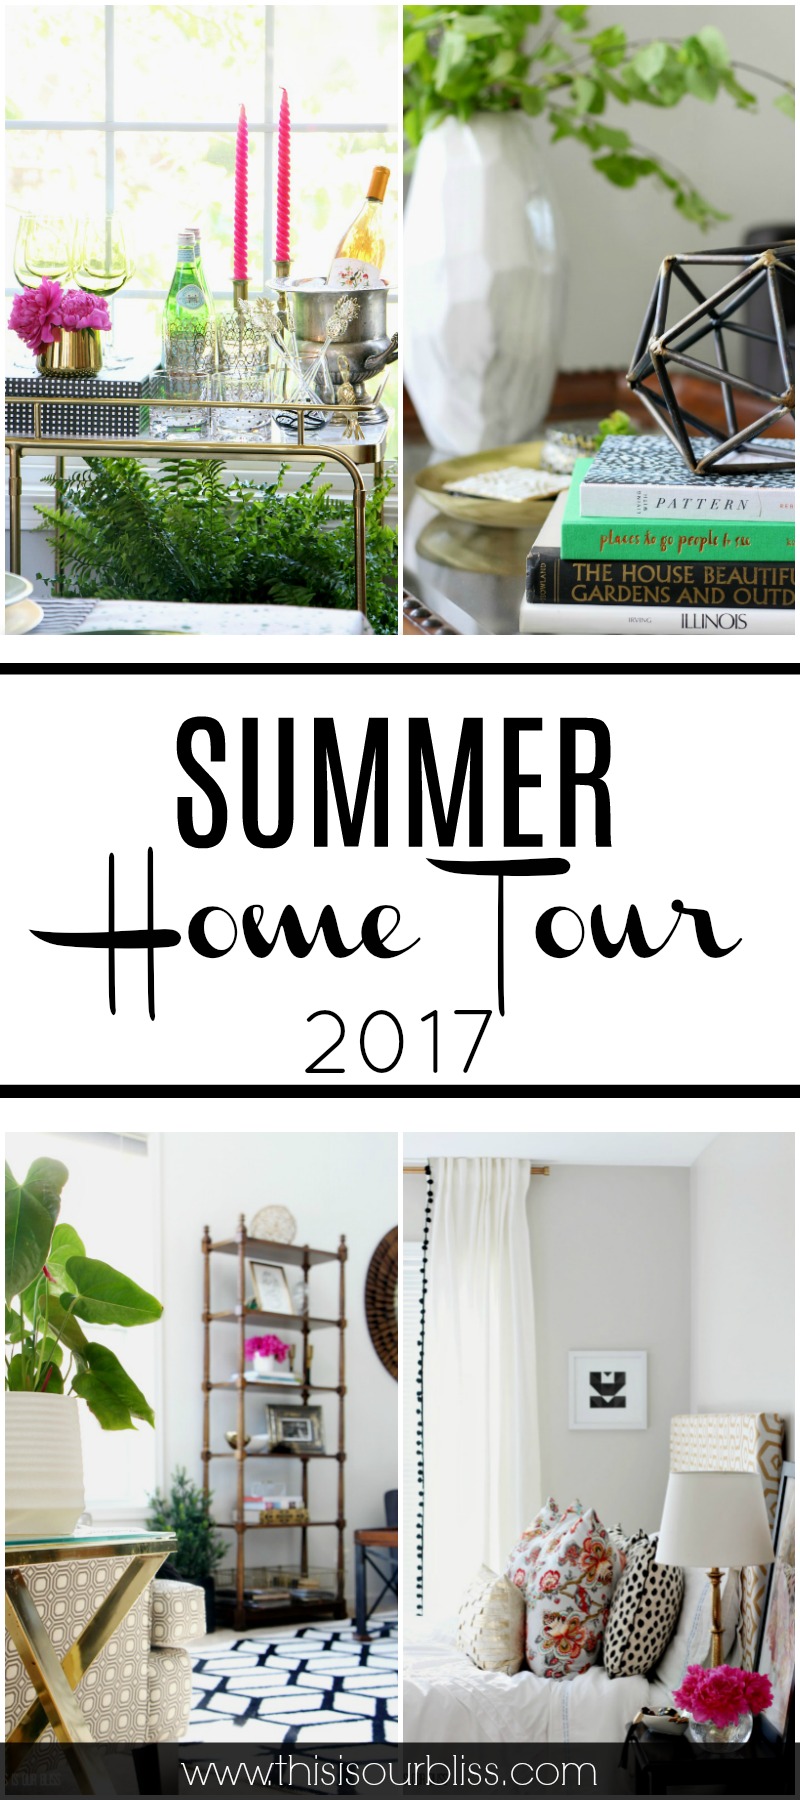 Chic & Bold Eclectic Summer Home Tour 2017 | www.thisisourbliss.com